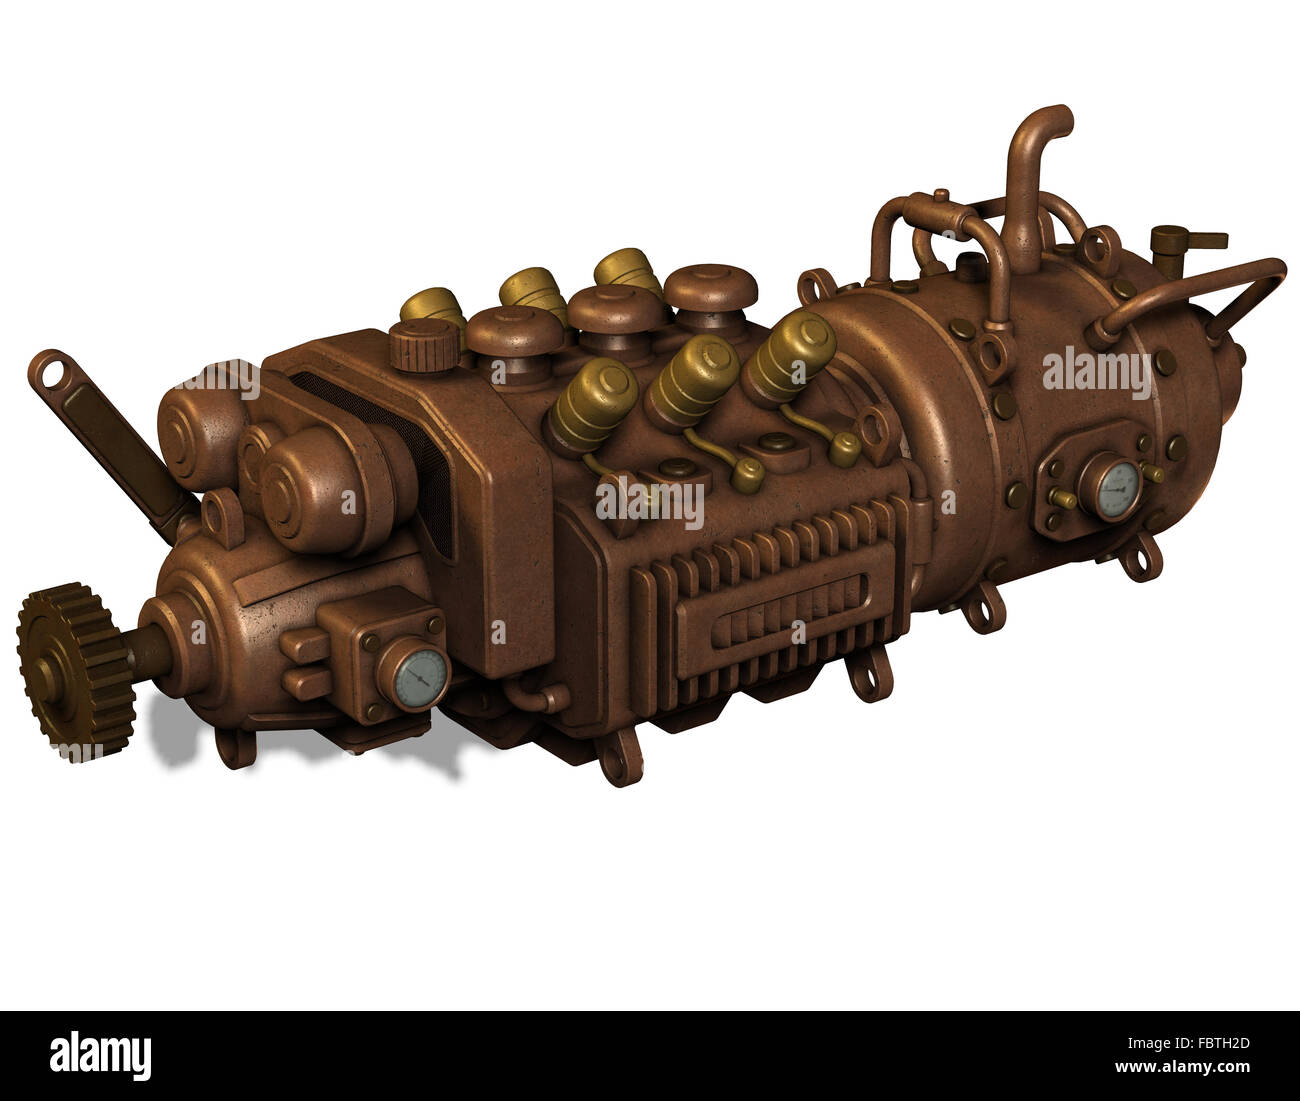 Illustration of an old engine Stock Photo - Alamy